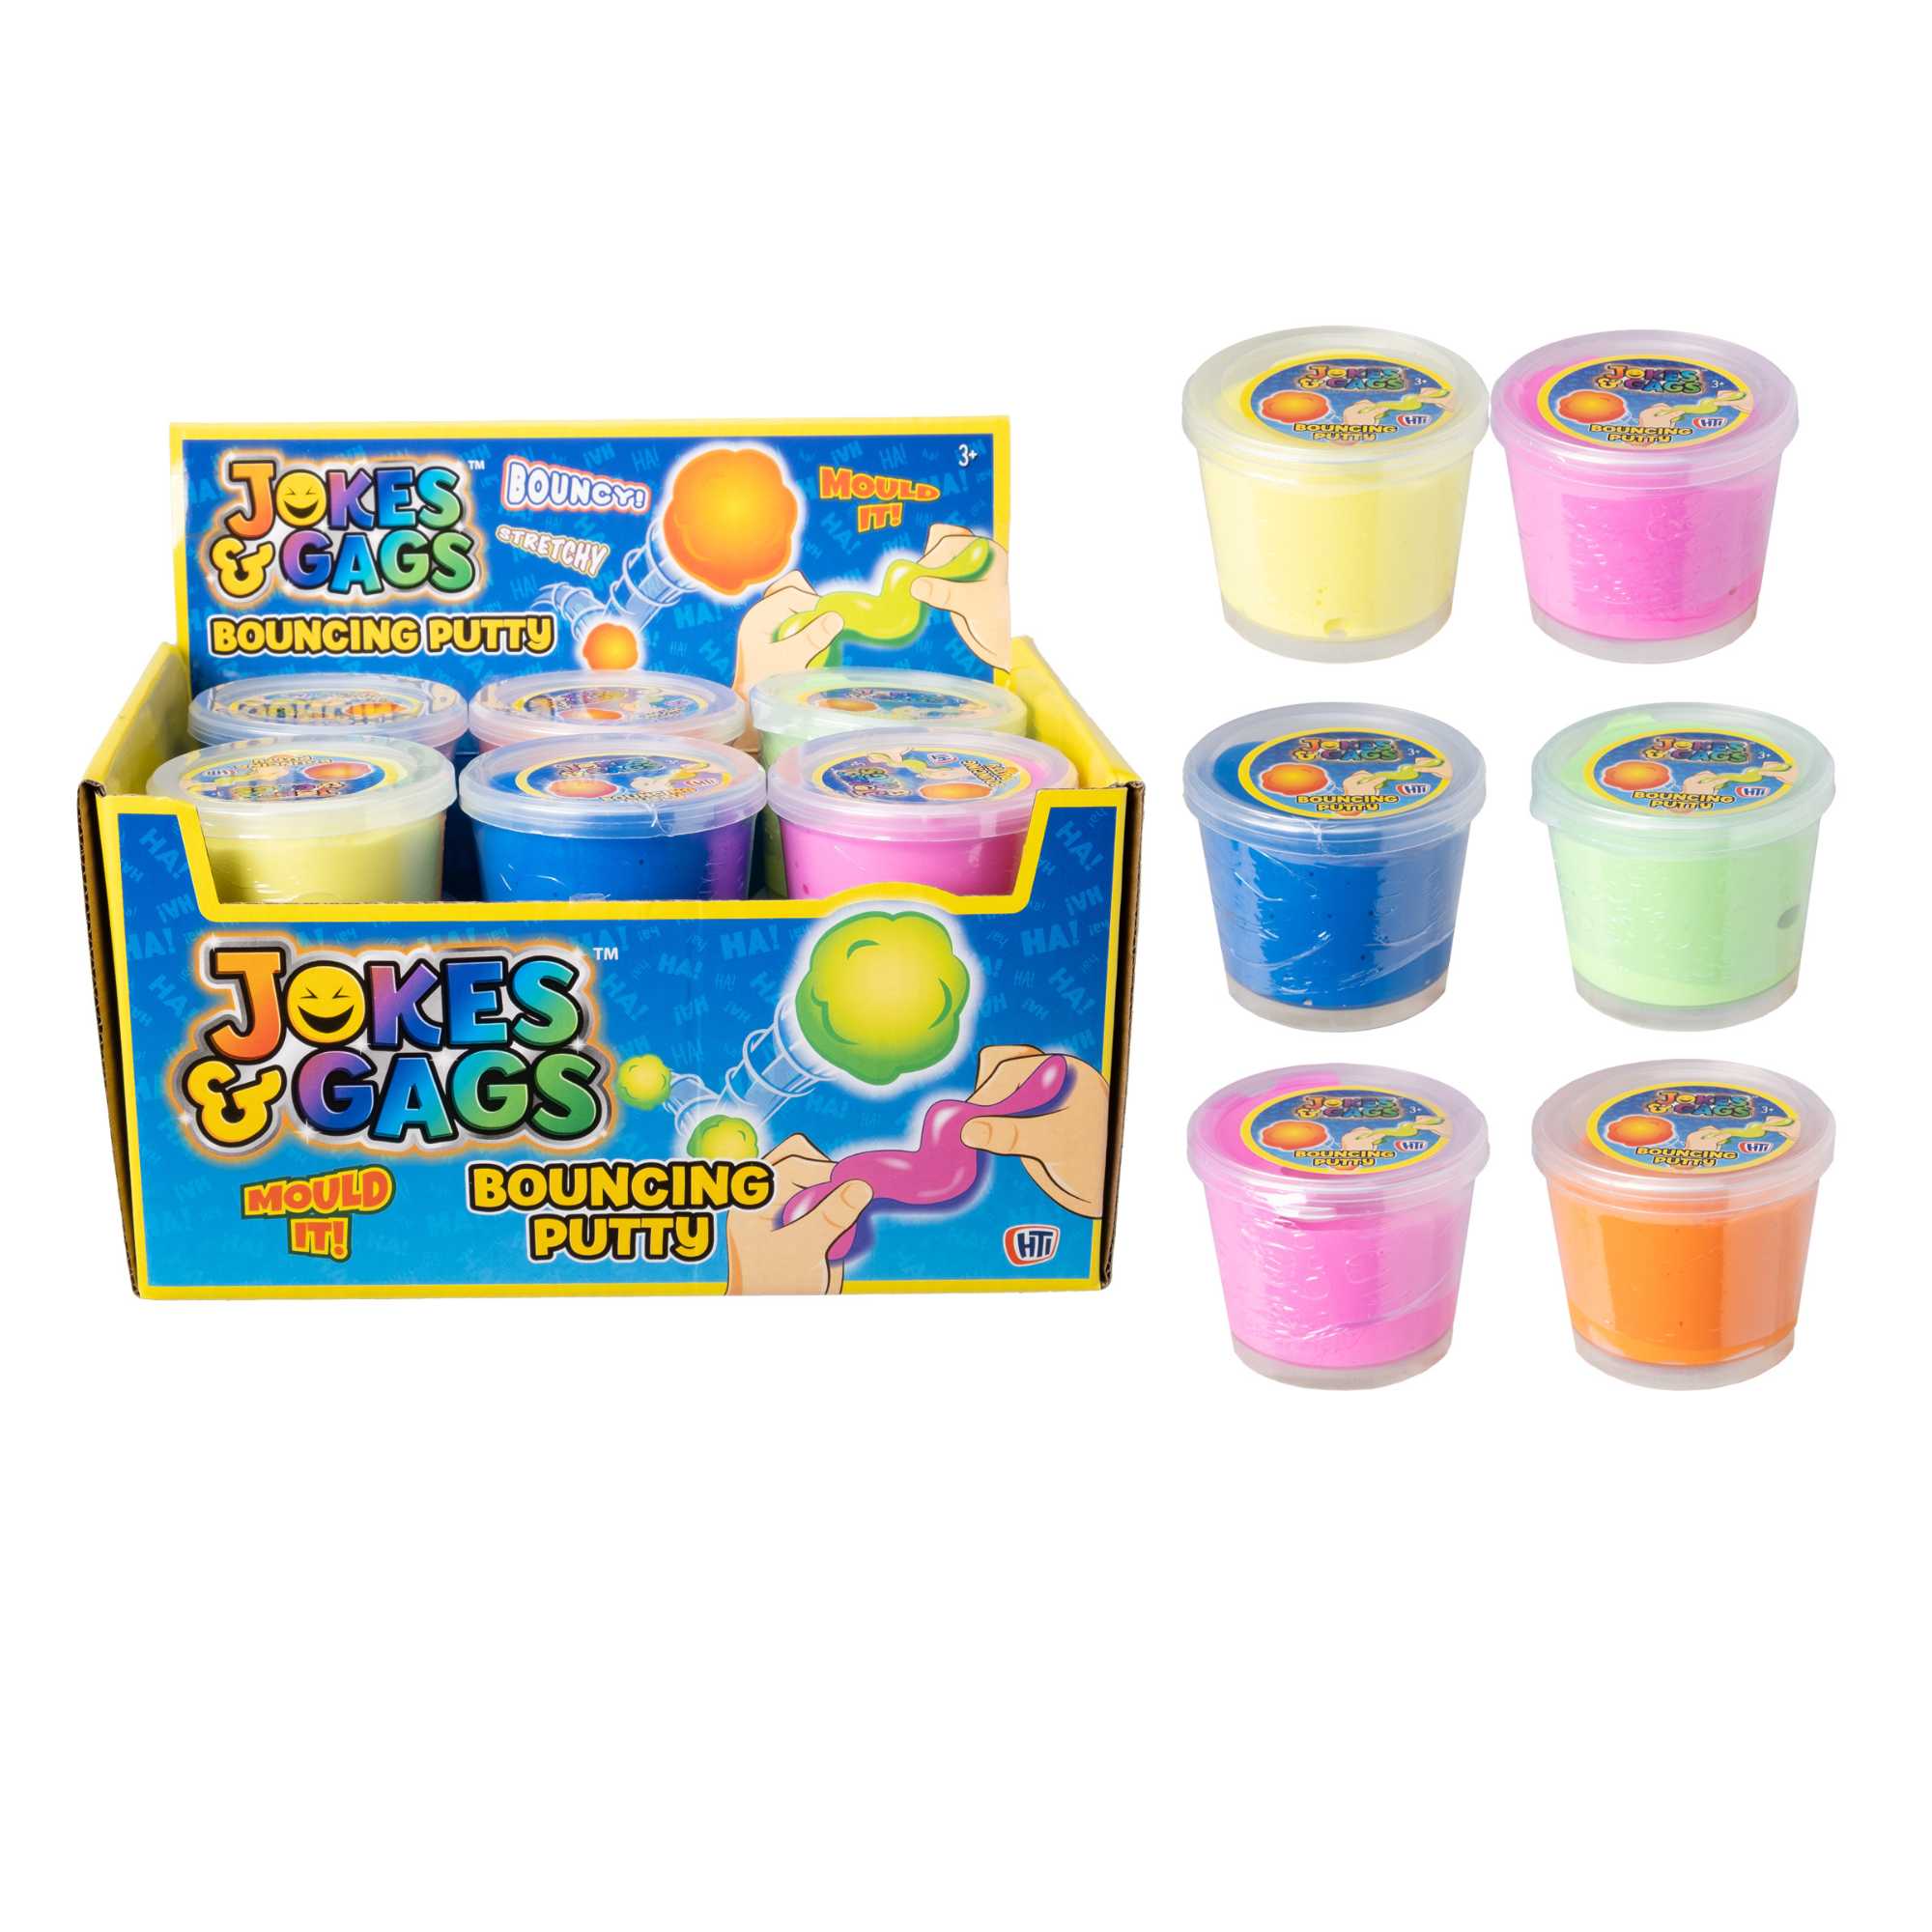 Collection of Bouncing Putty in a display box, showcasing 12 units with 6 vibrant colors, perfect for creative play and stress relief